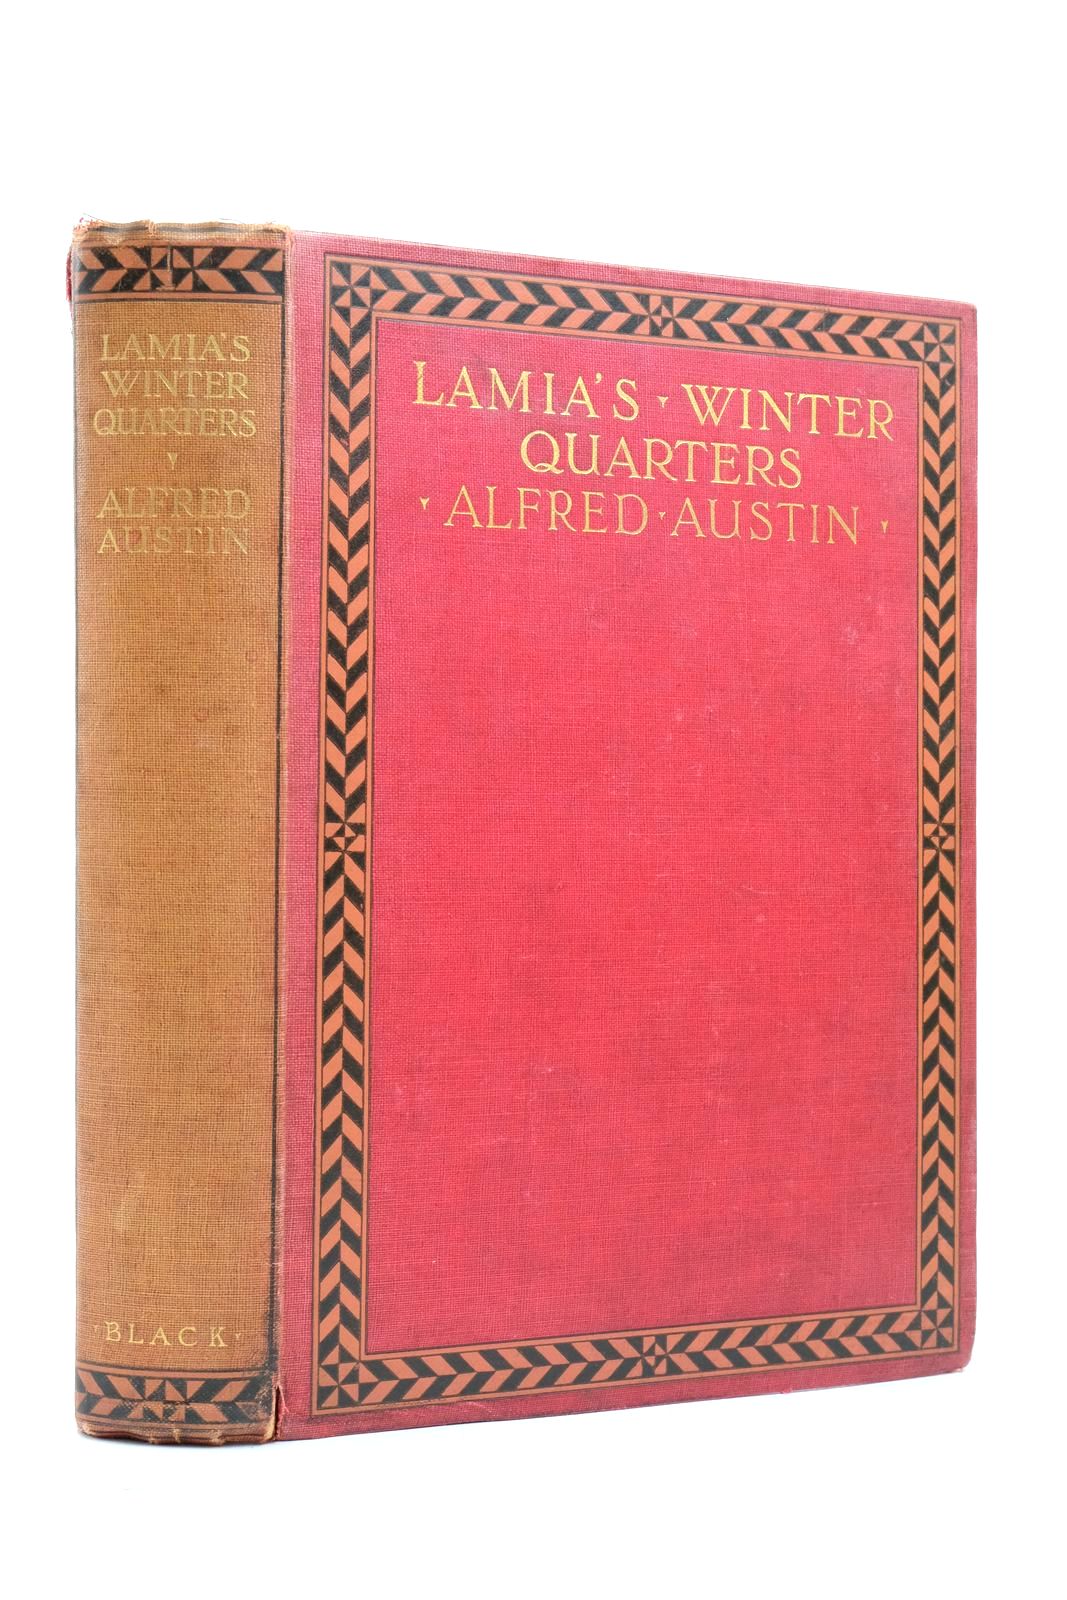 Photo of LAMIA'S WINTER-QUARTERS written by Austin, Alfred illustrated by Elgood, George Samuel published by Adam & Charles Black (STOCK CODE: 2137588)  for sale by Stella & Rose's Books